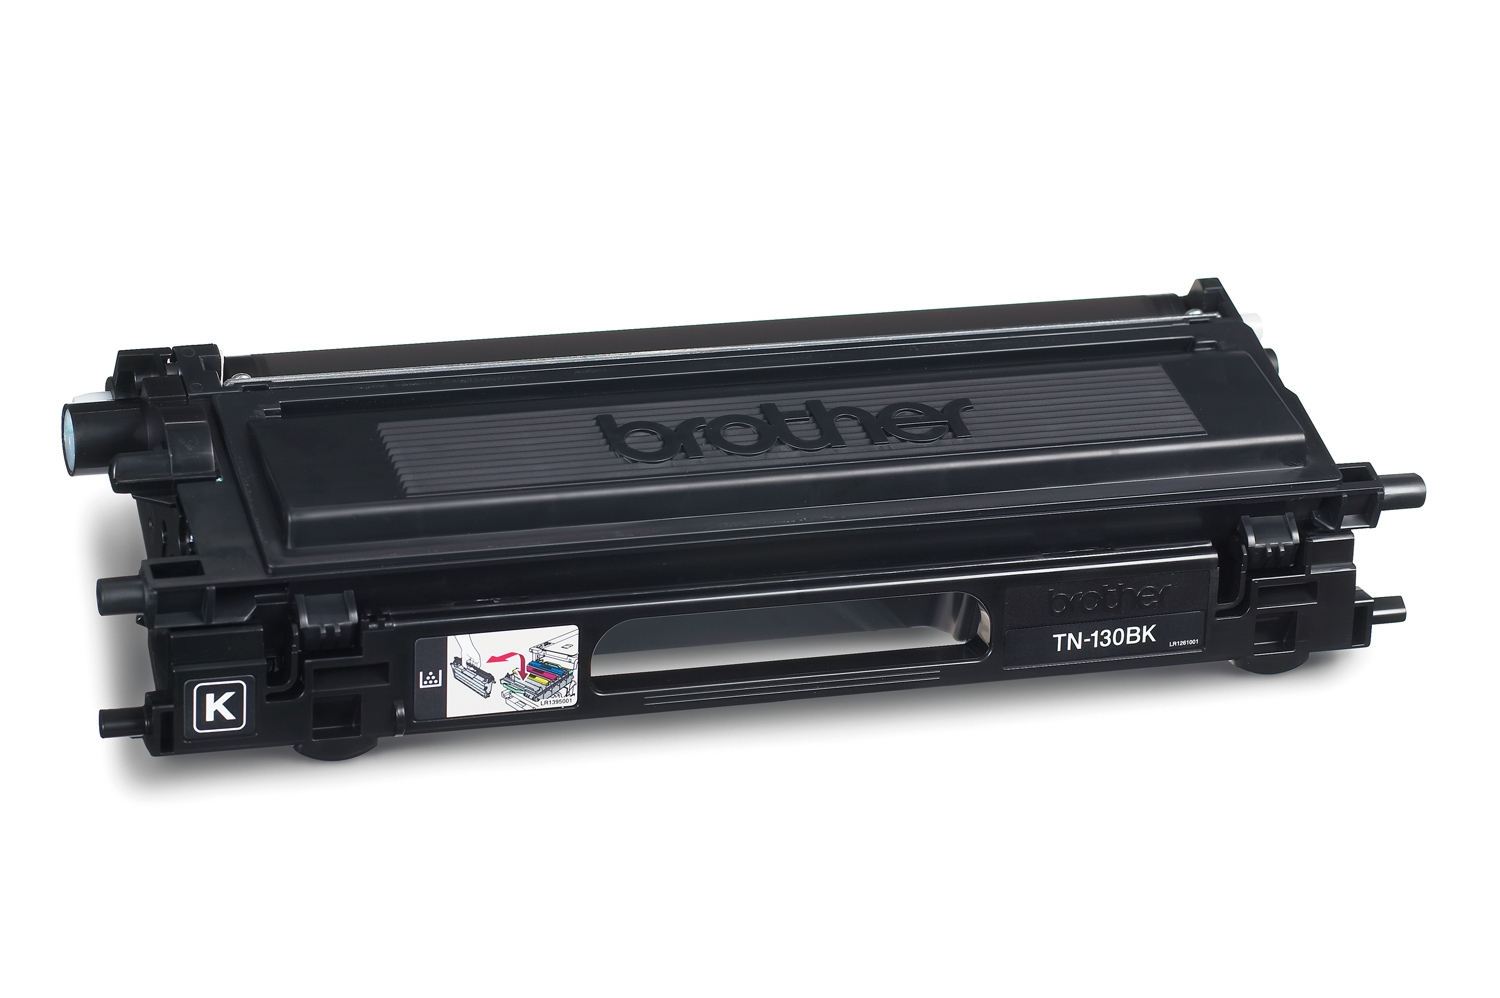 Brother TN-130BK Toner black, 2.5K pages ISO/IEC 19798 for Brother HL-4040 CN